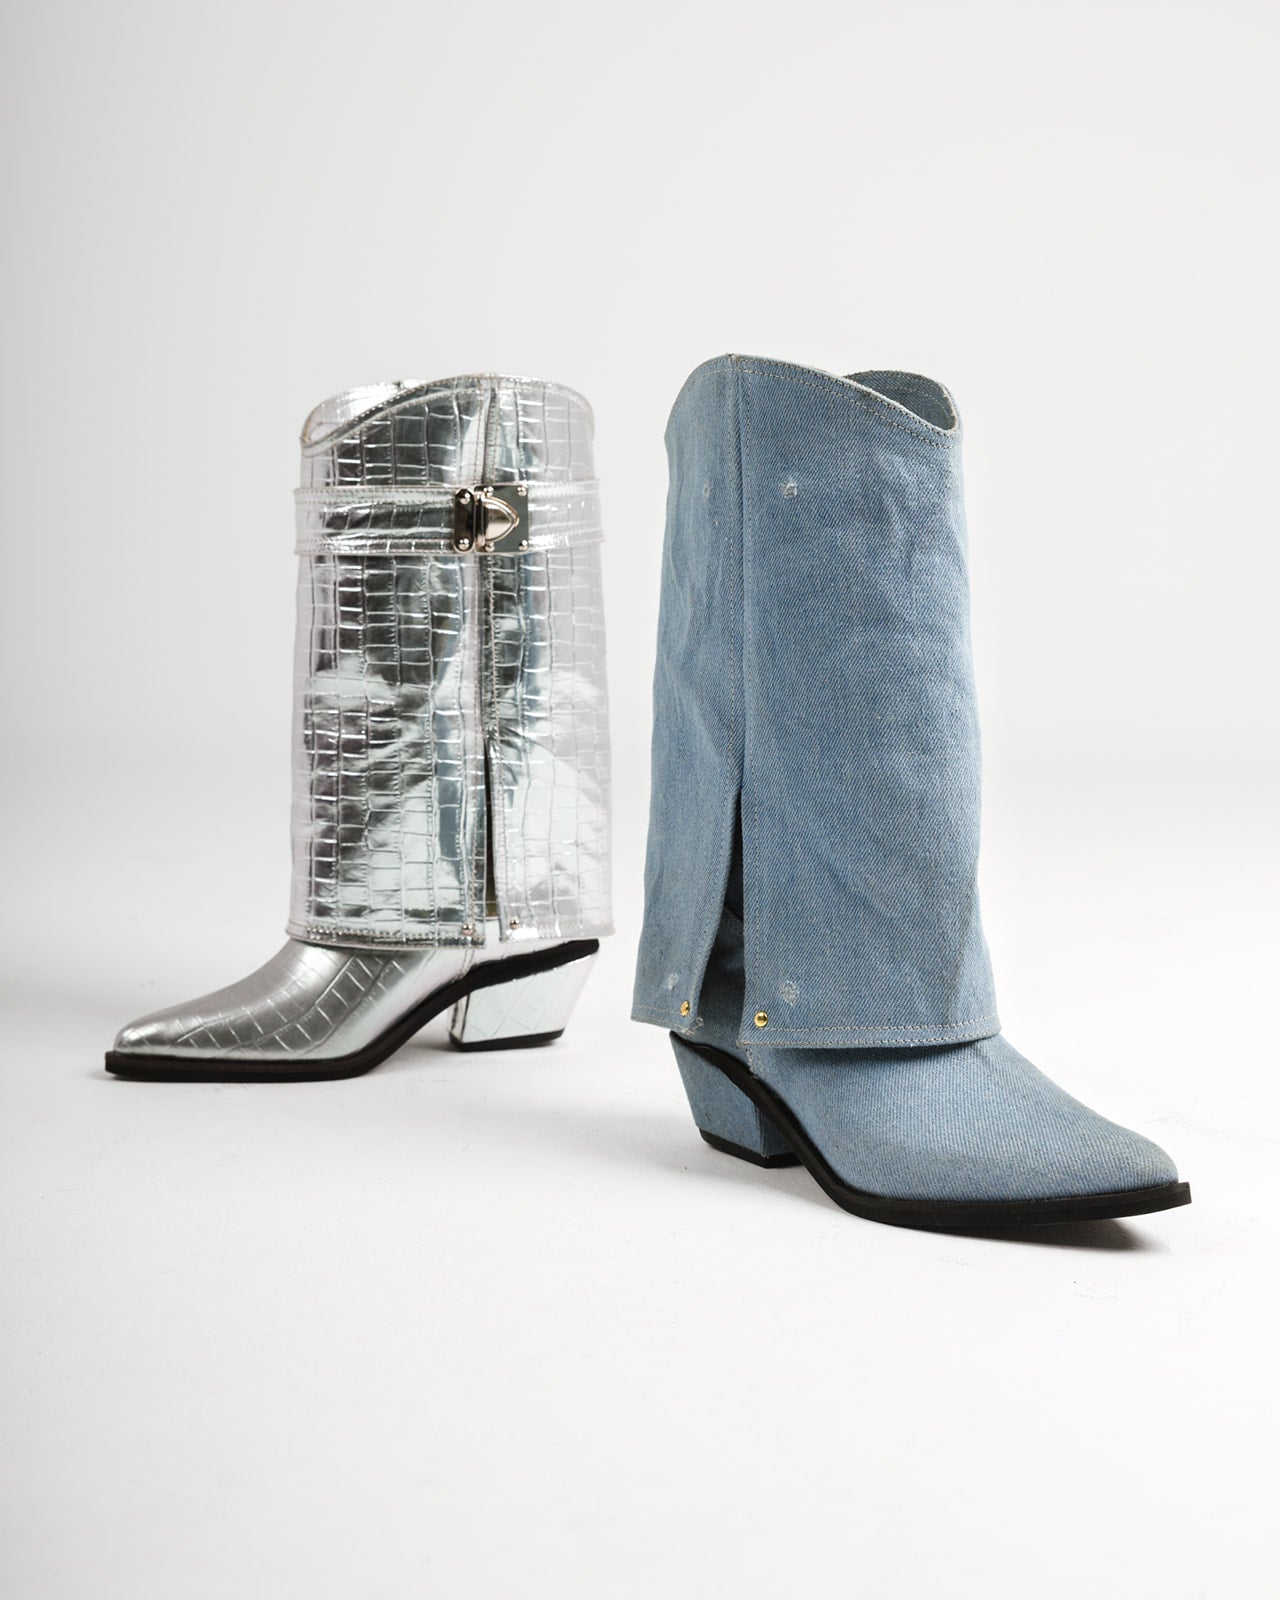 The Texas Boot in Silver Croc